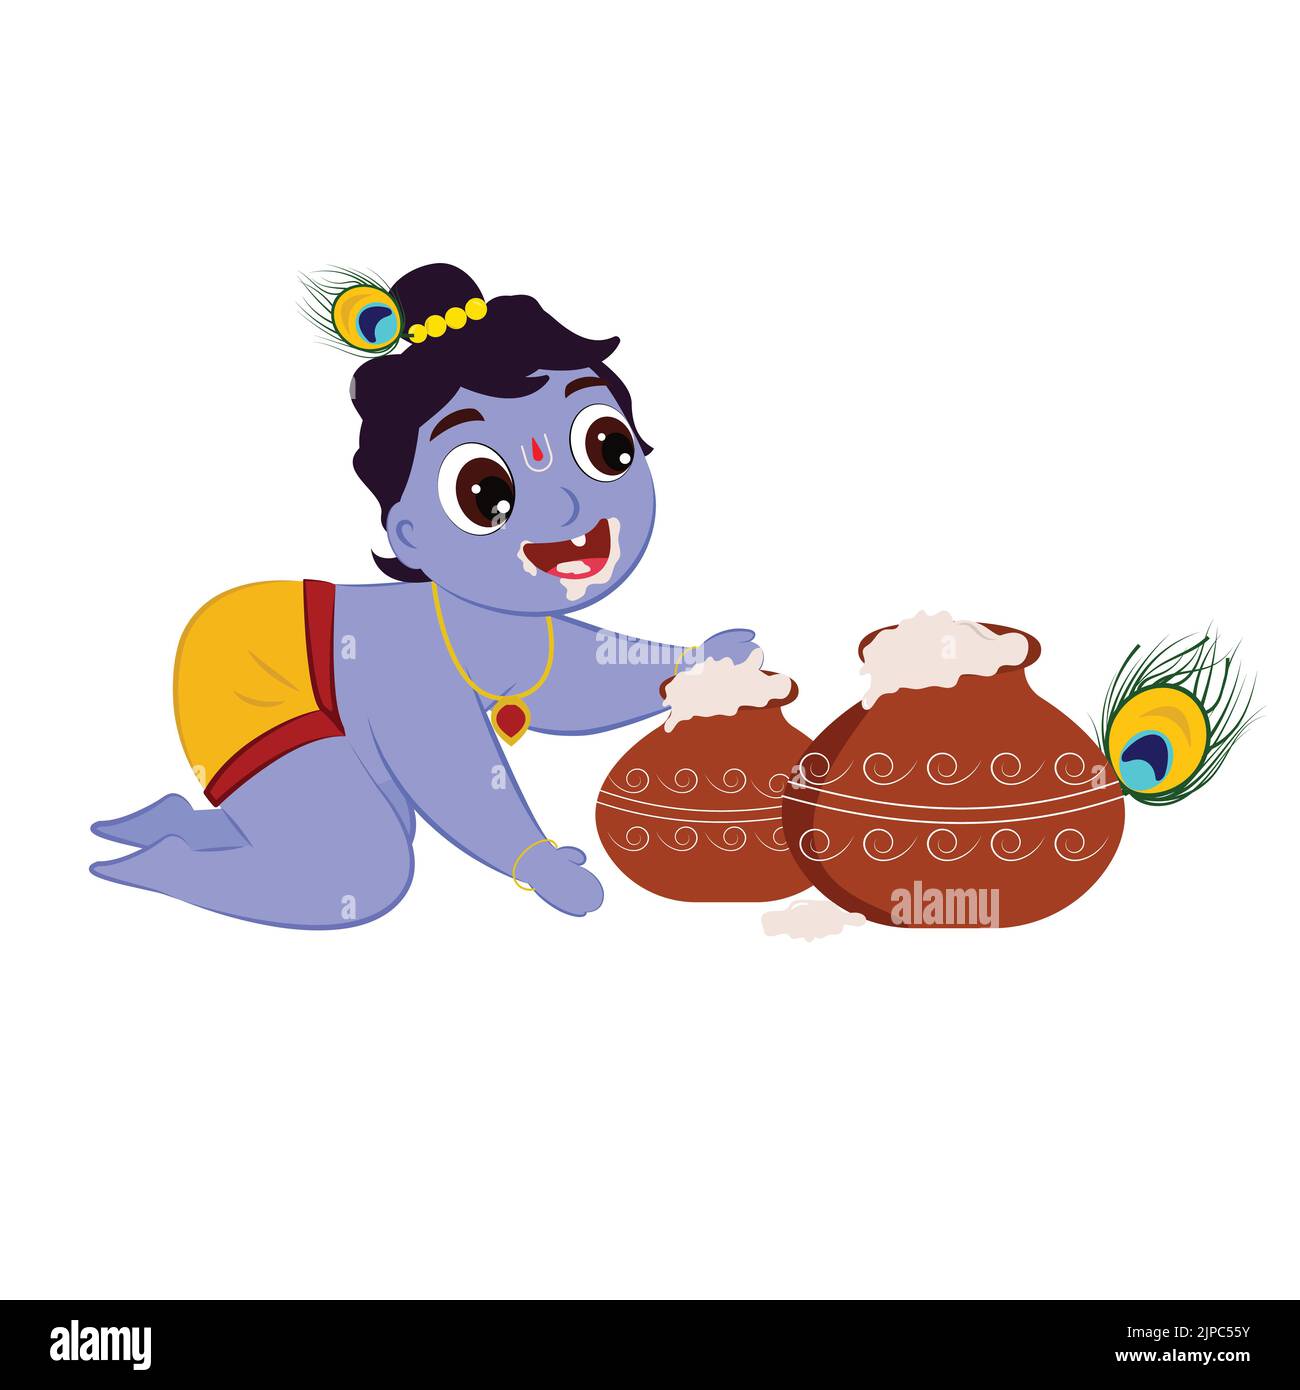 Lord krishna Cut Out Stock Images & Pictures - Page 2 - Alamy